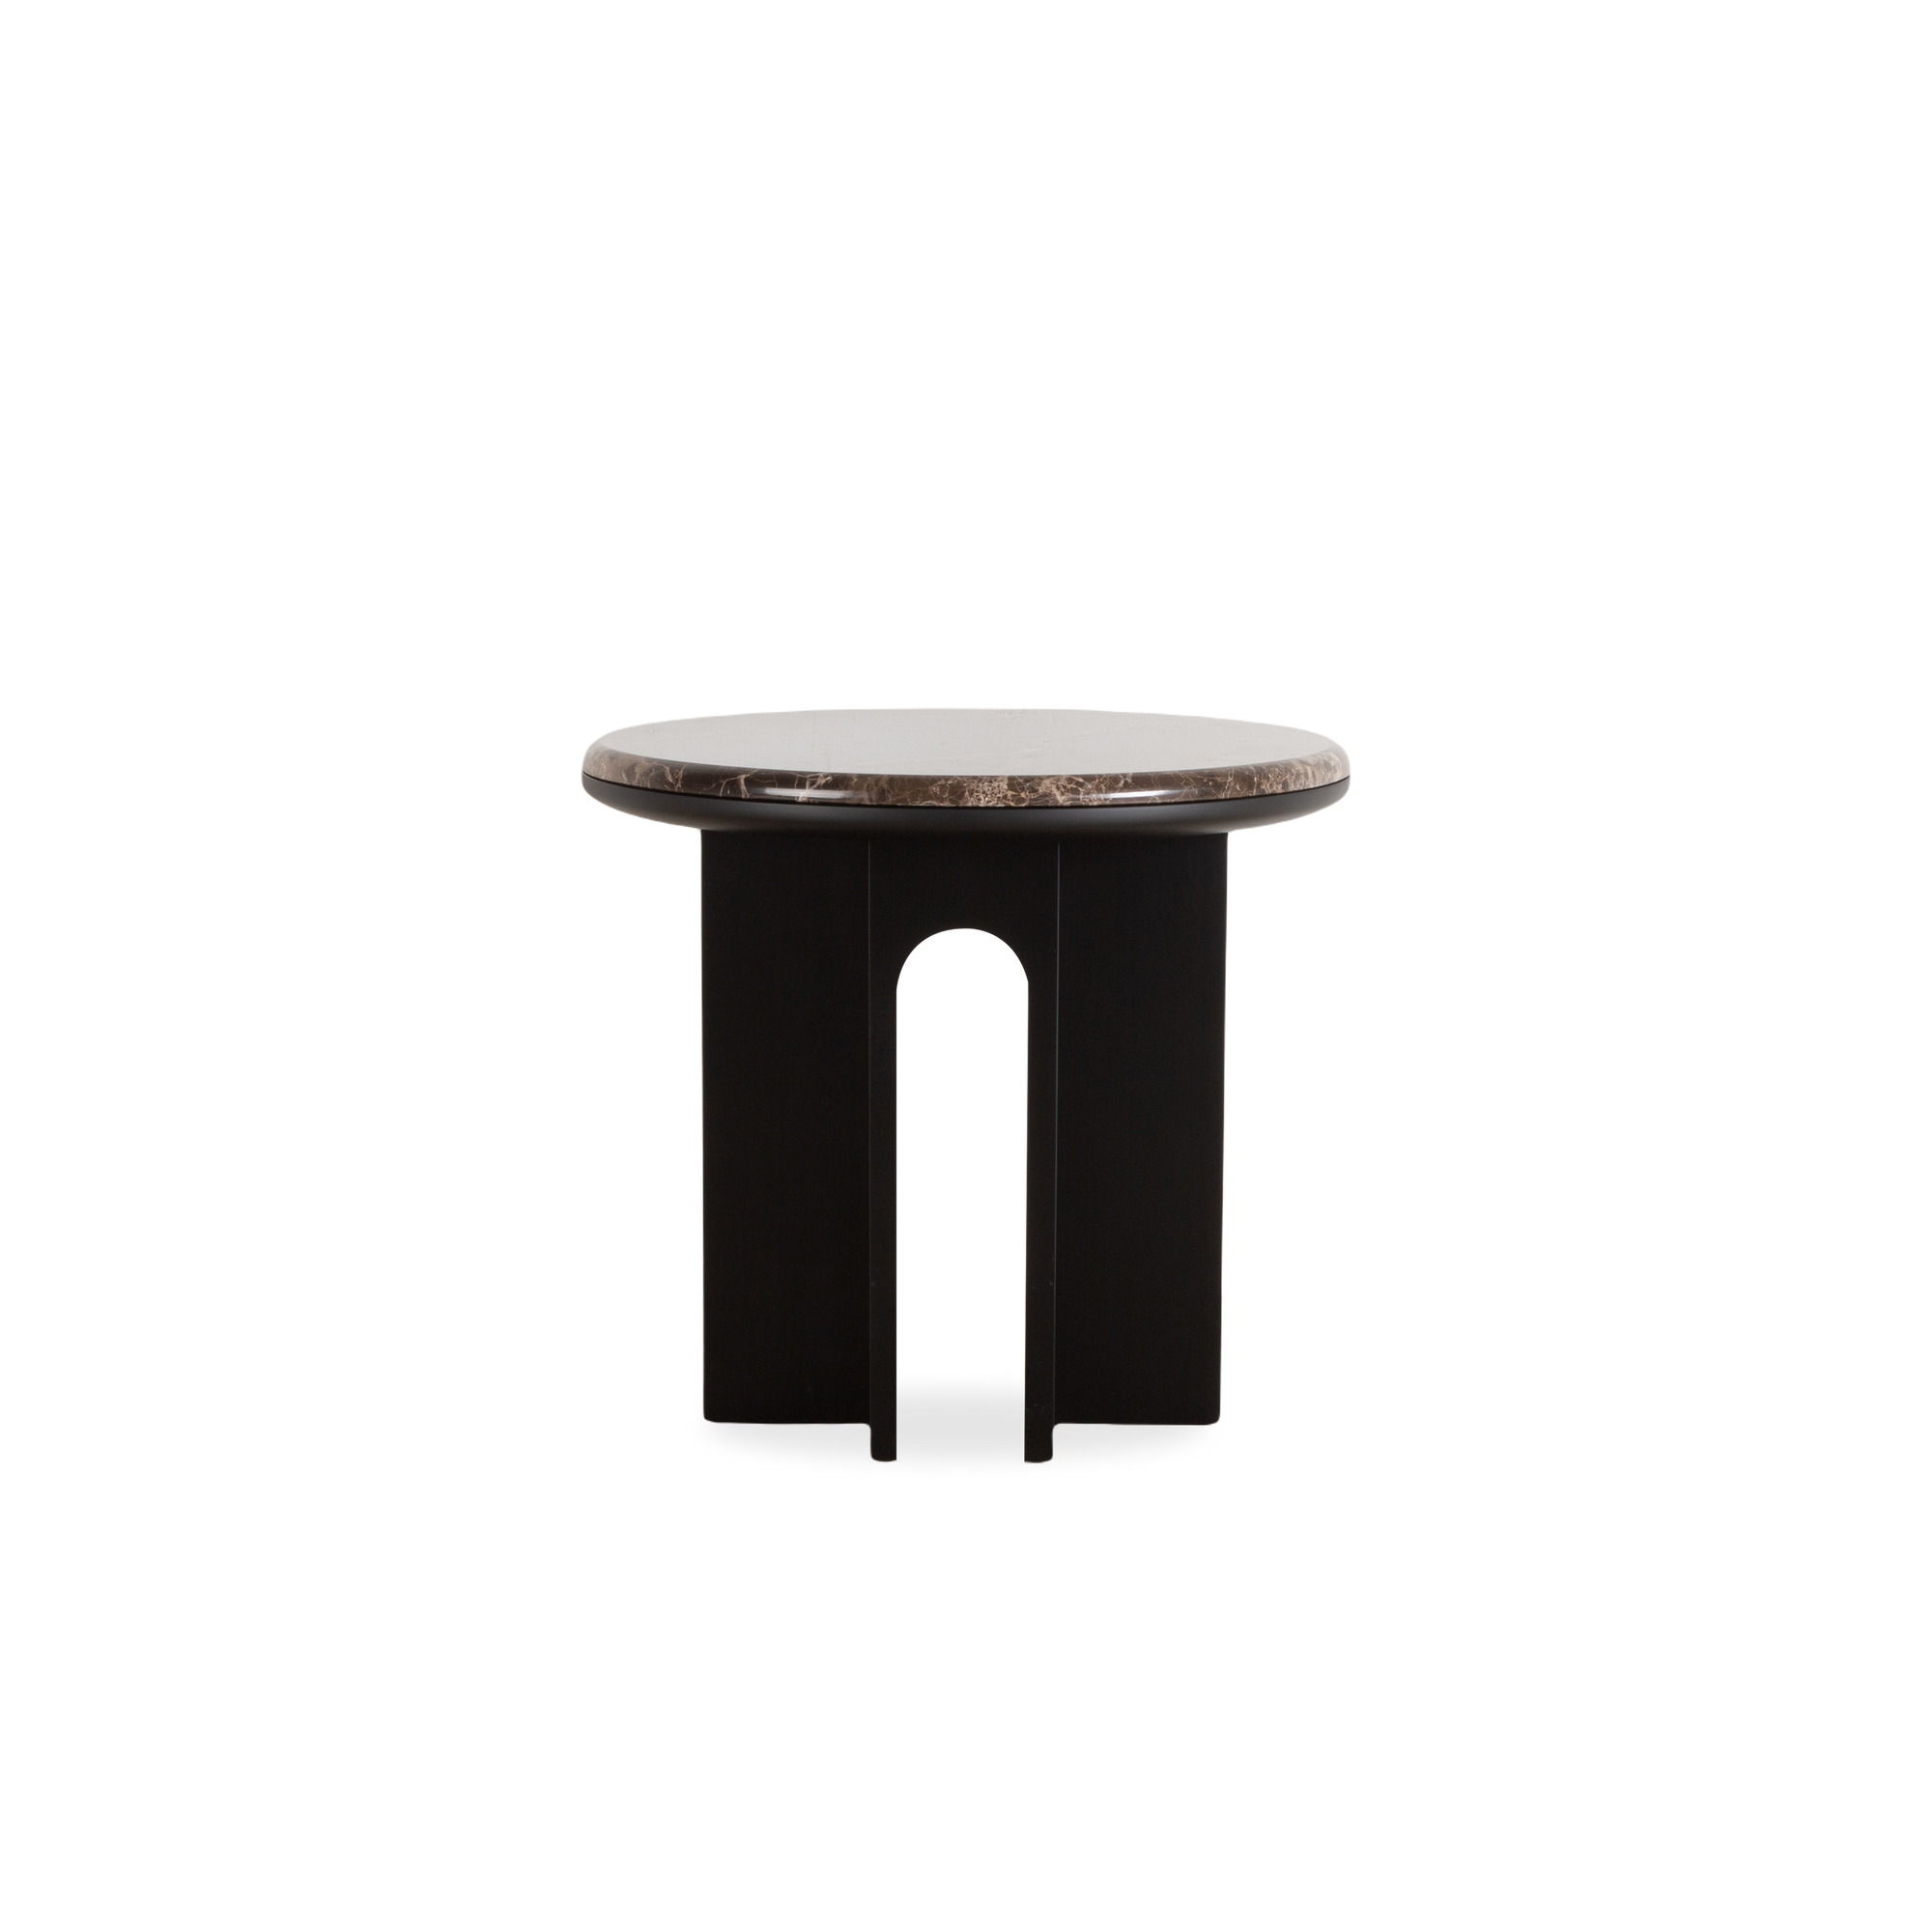 Drawing parallels with iconic Roman aqueducts, Jaime Hayon's Arcolor Side Table reimagines functional design through the lens of classical geometry.